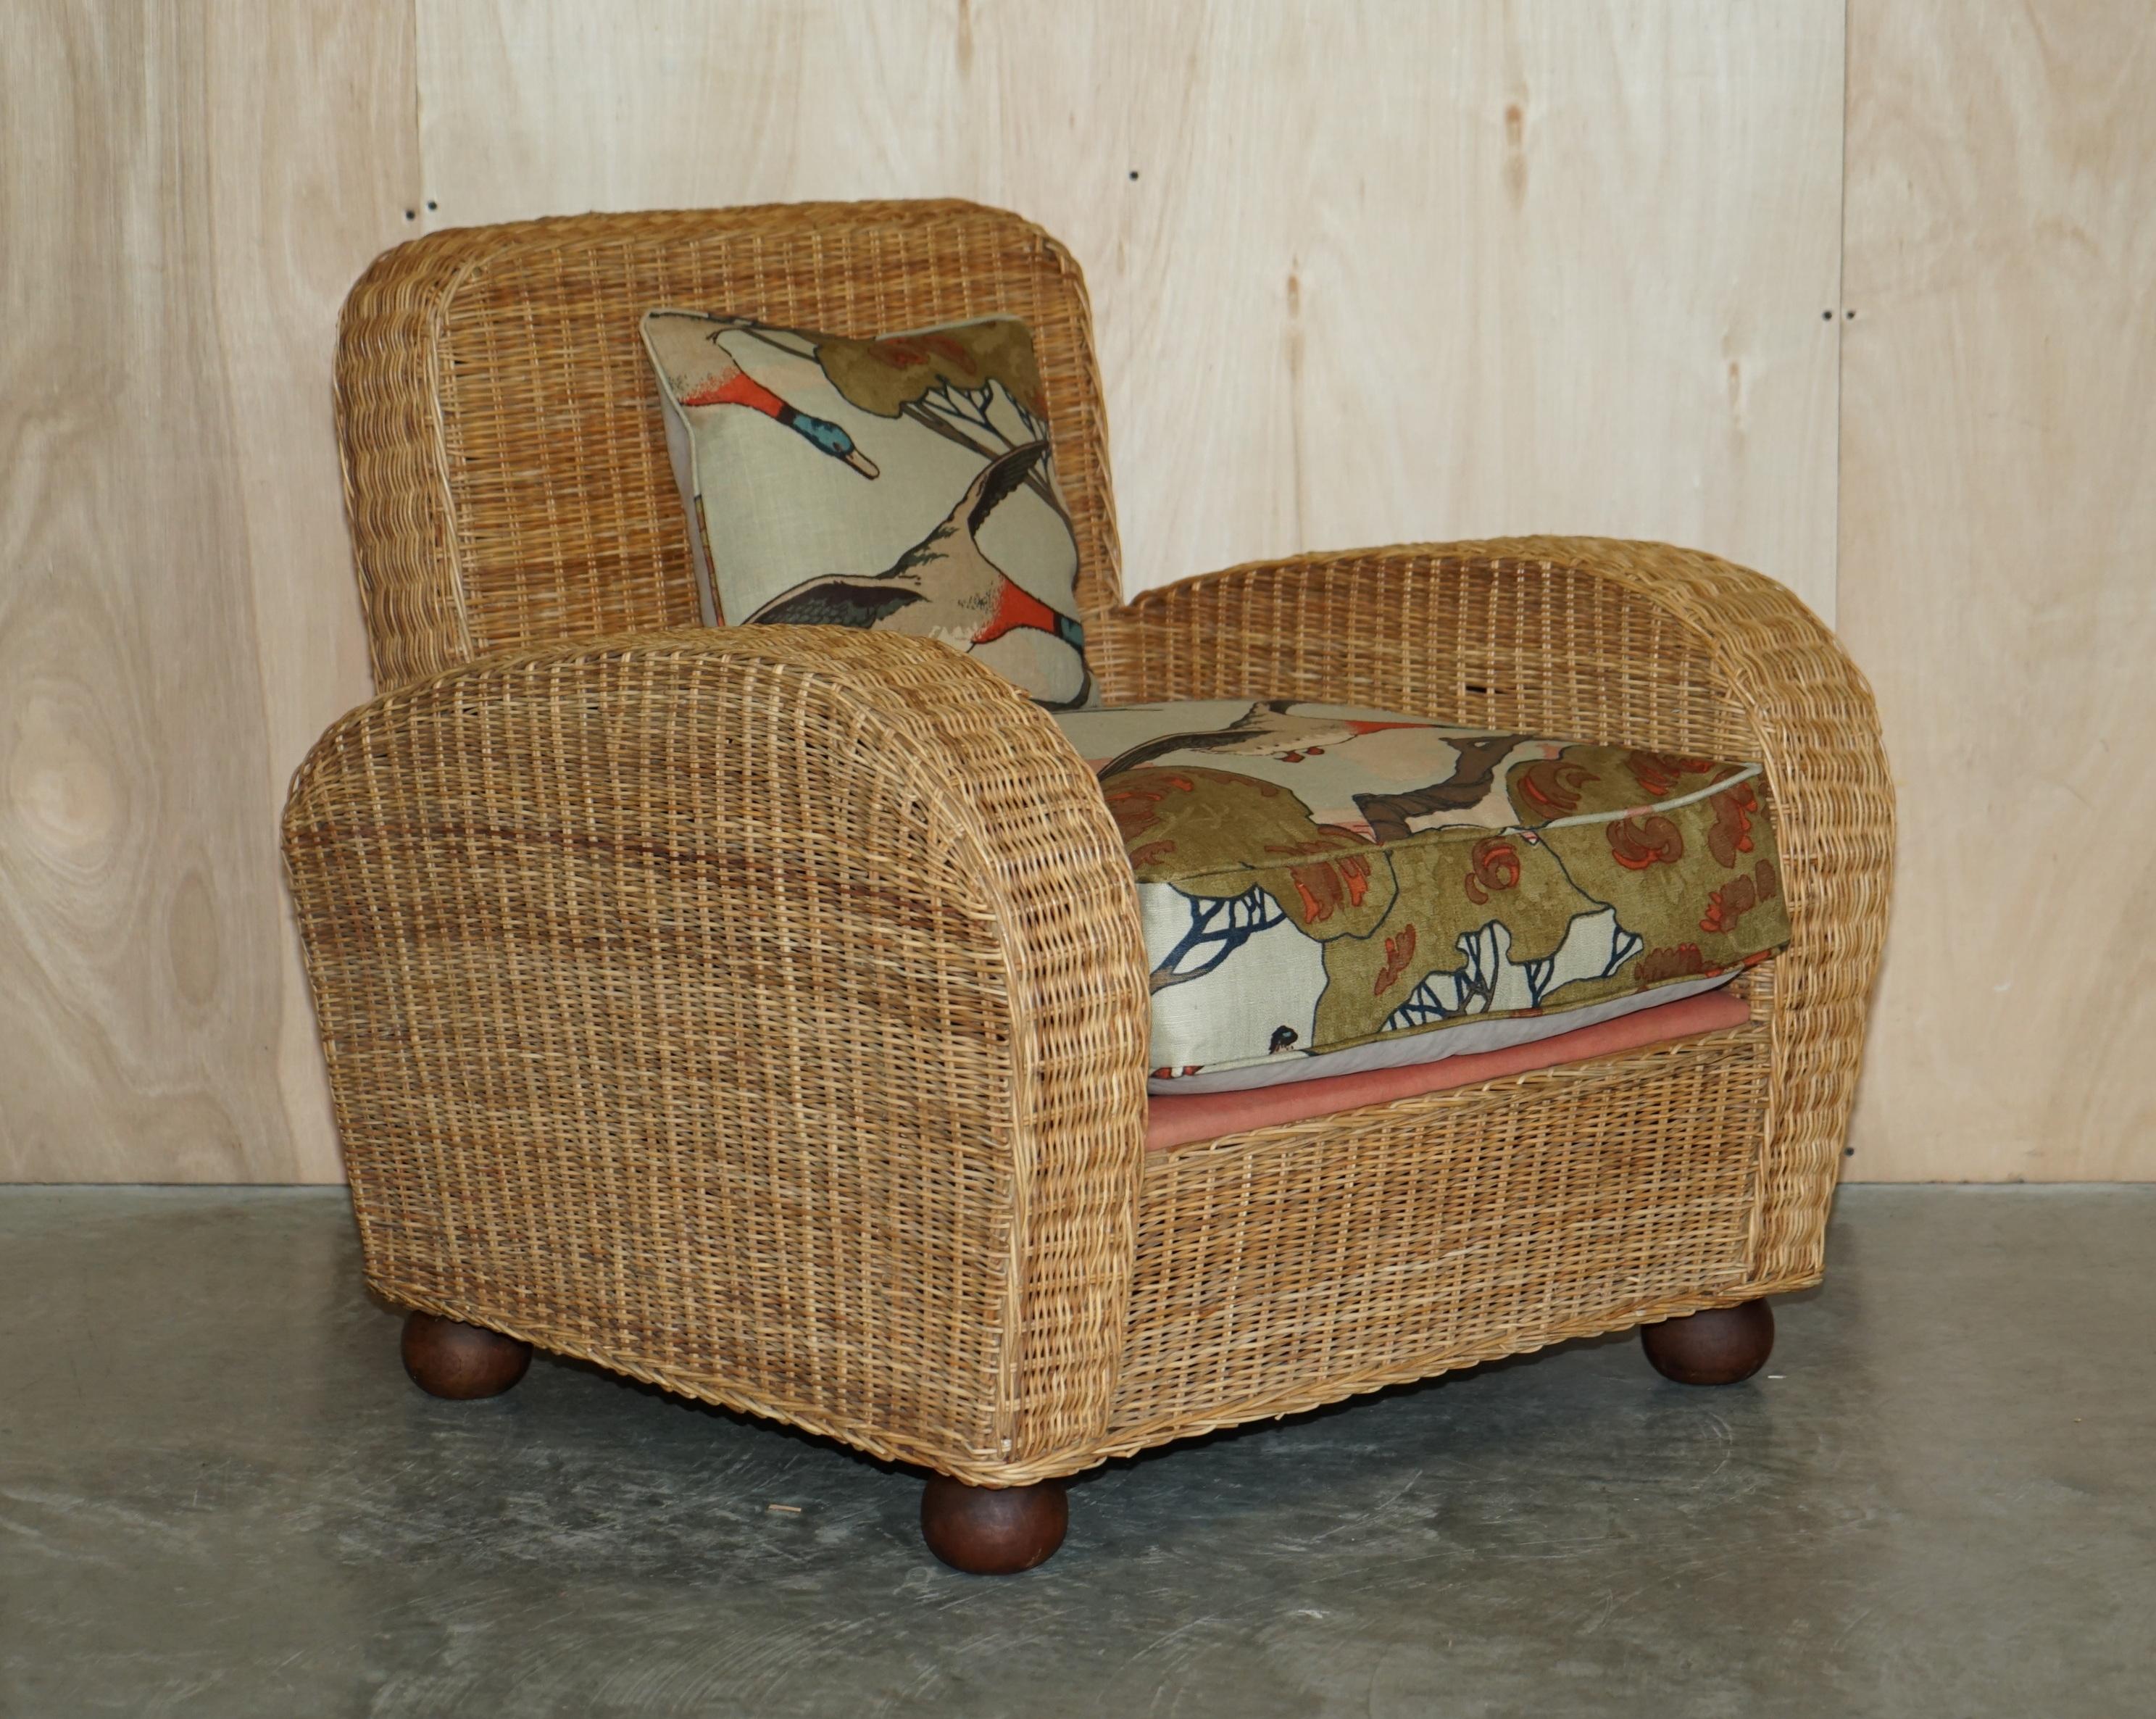 PAIR OF ART DECO STYLE WICKER CLUB ARMCHAIRS WiTH MULBERRY FLYING DUCKS CUSHIONS For Sale 5